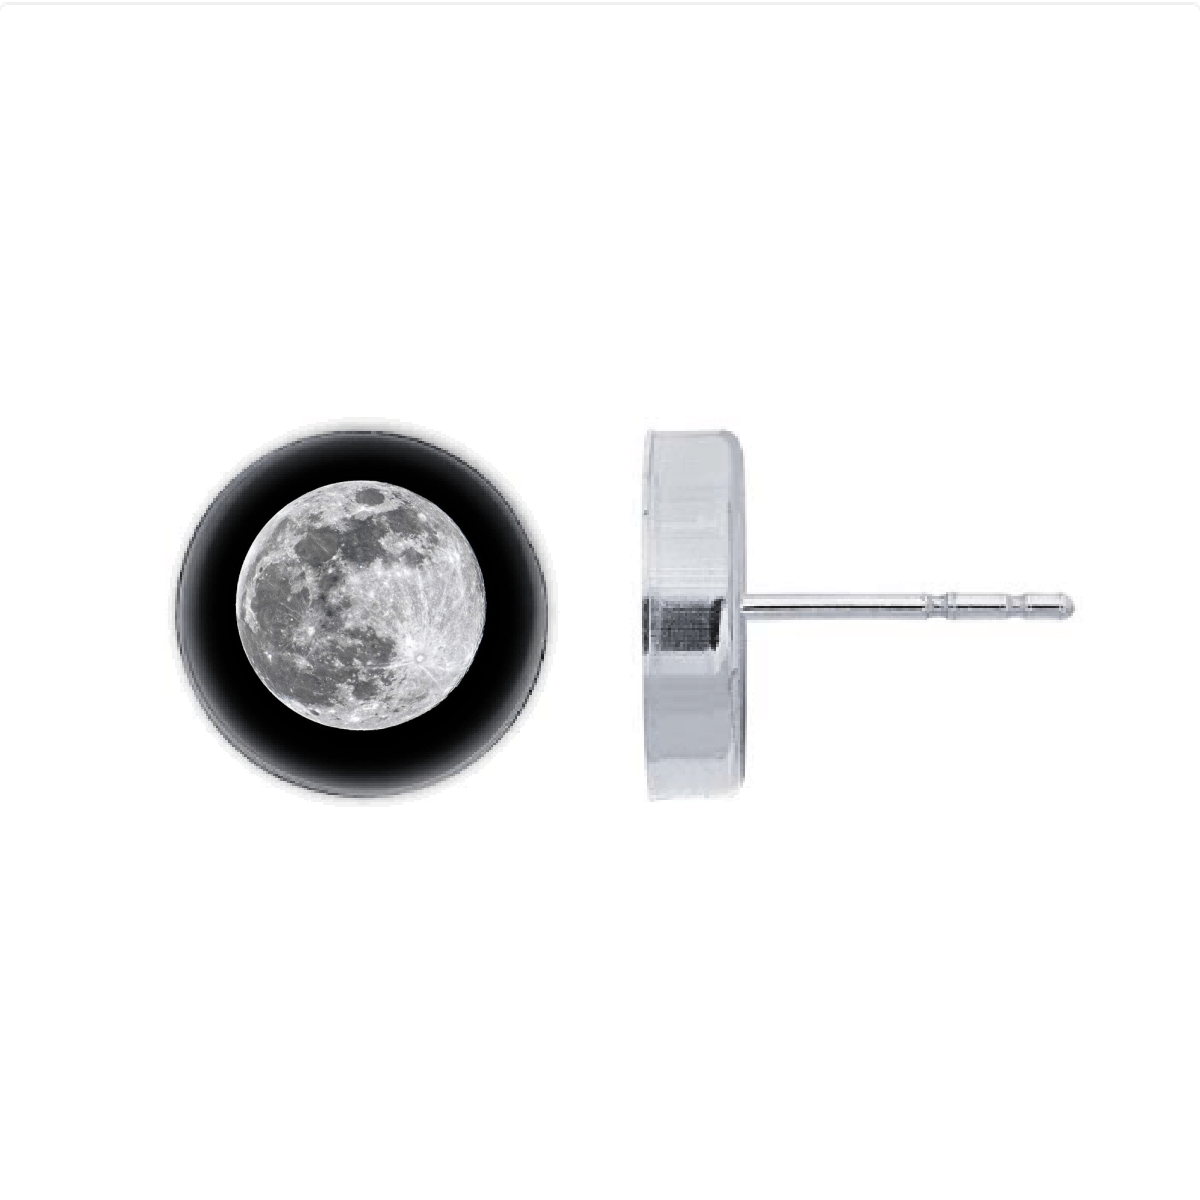 Full Moon Post Earrings by Carissa Photopoulos